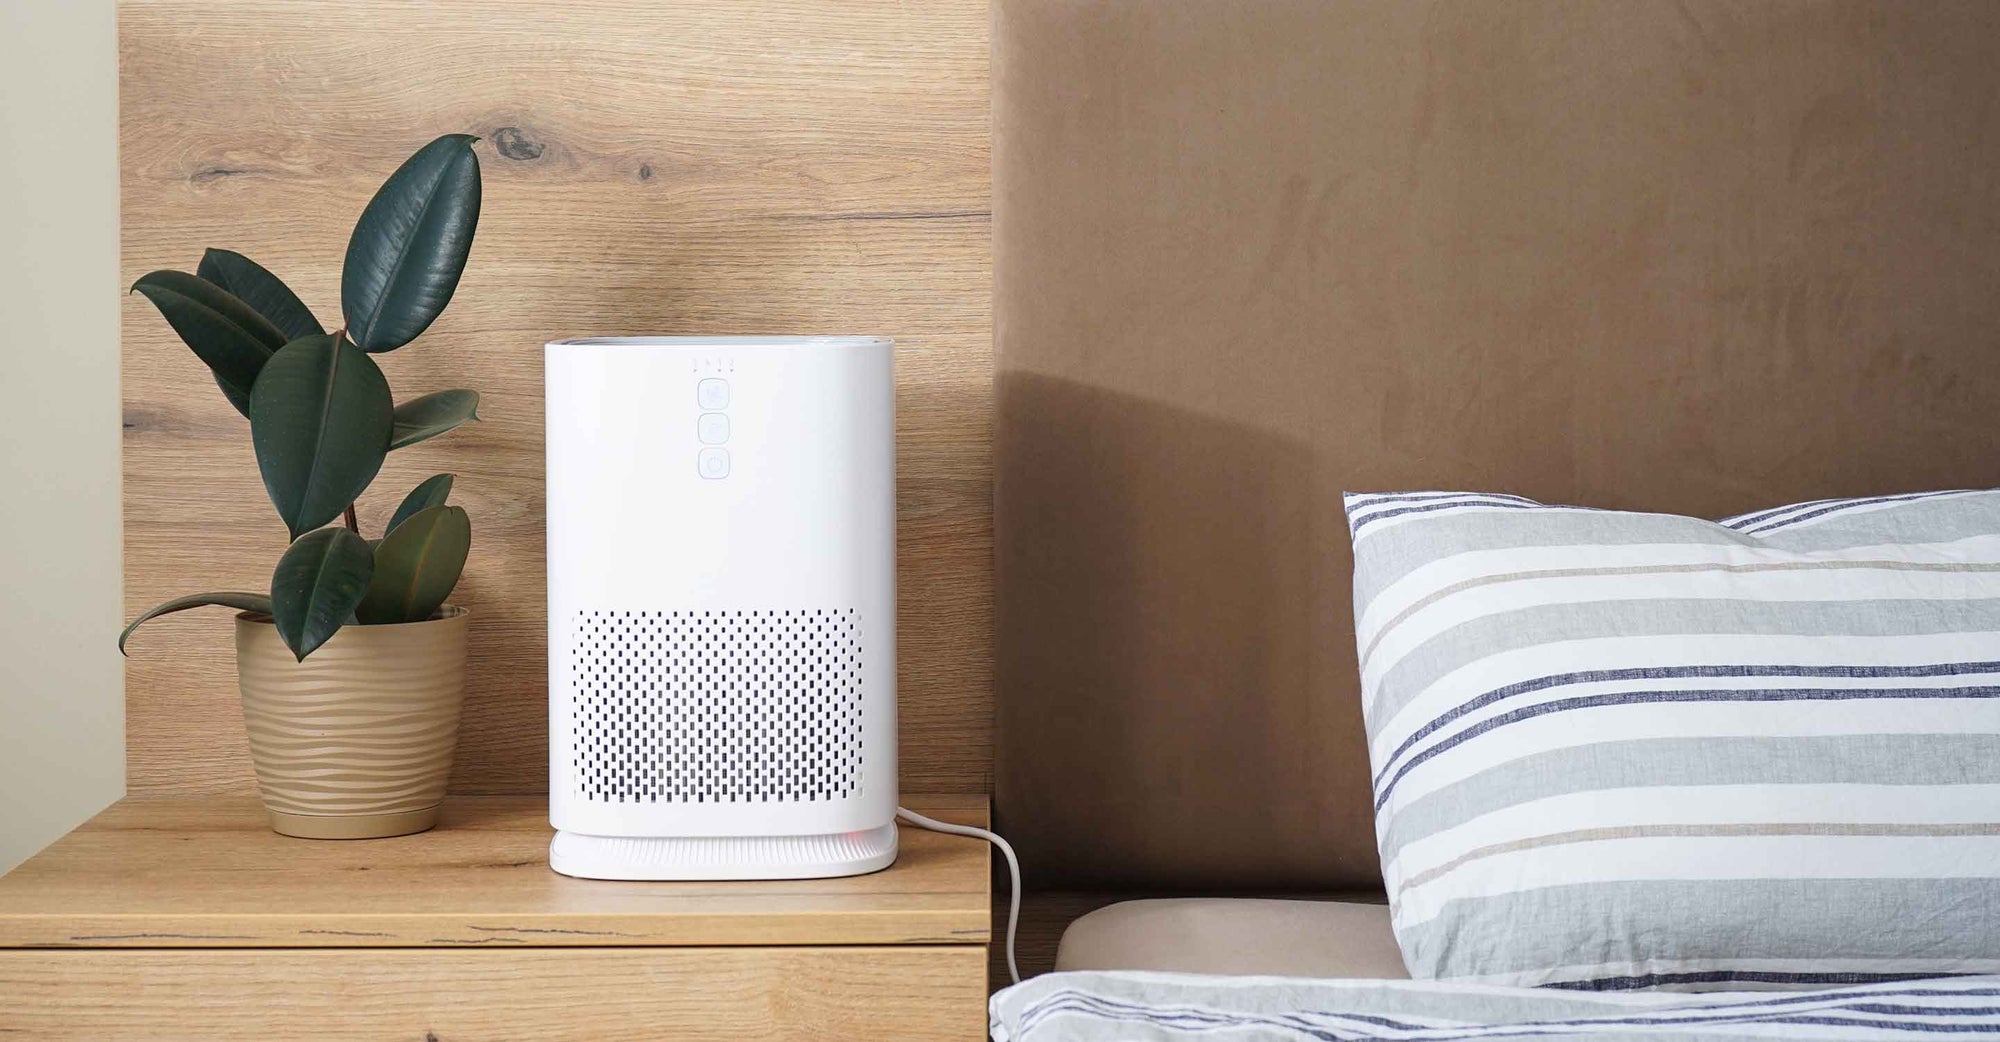 small air purifier by bed